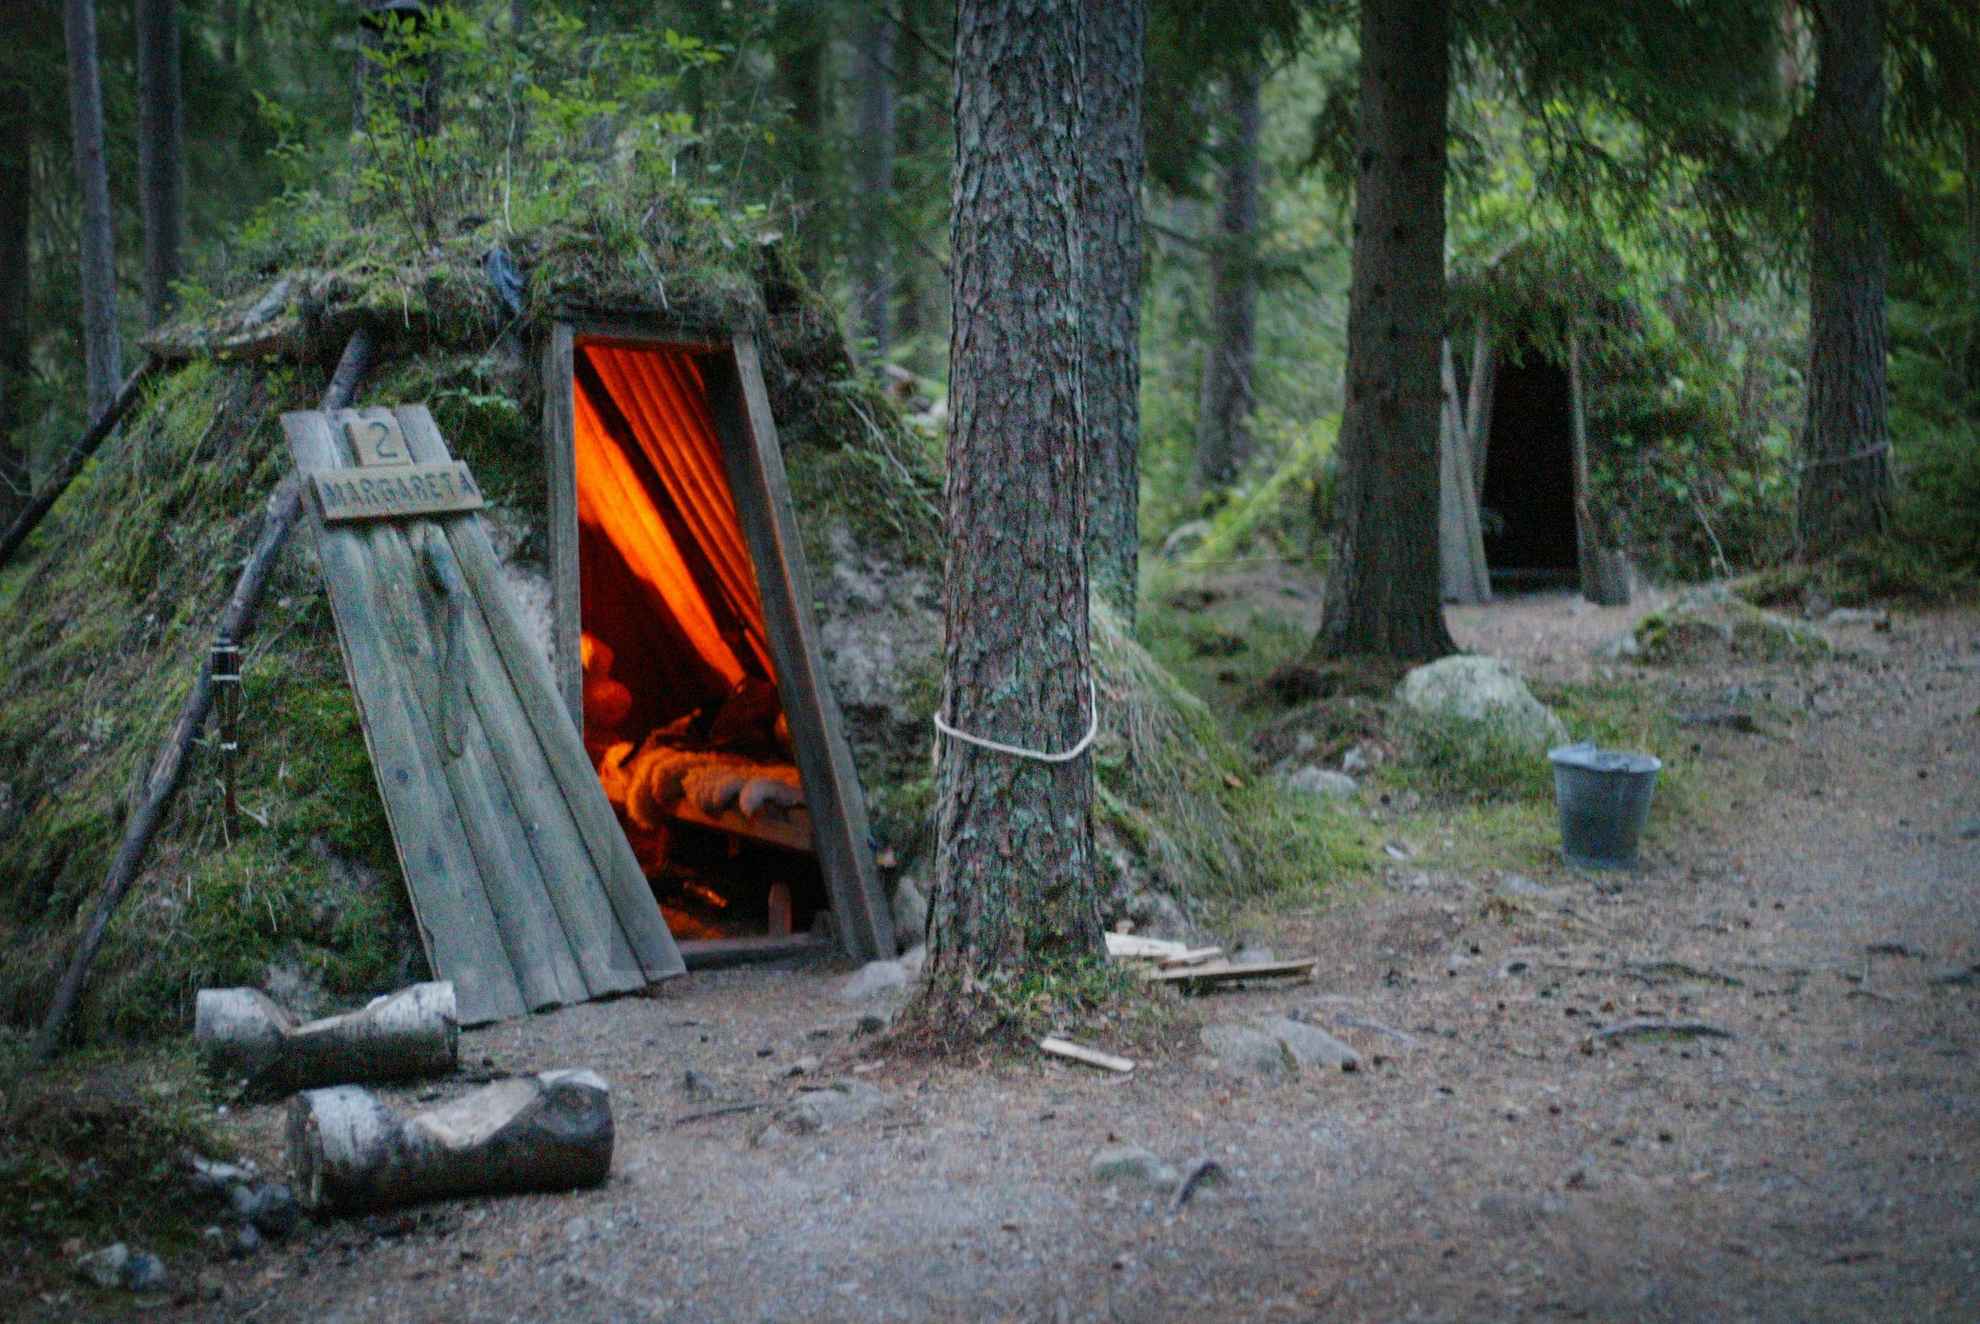 Two forest huts covered with moss located in a forest. In one of the huts a fireplace is burning.